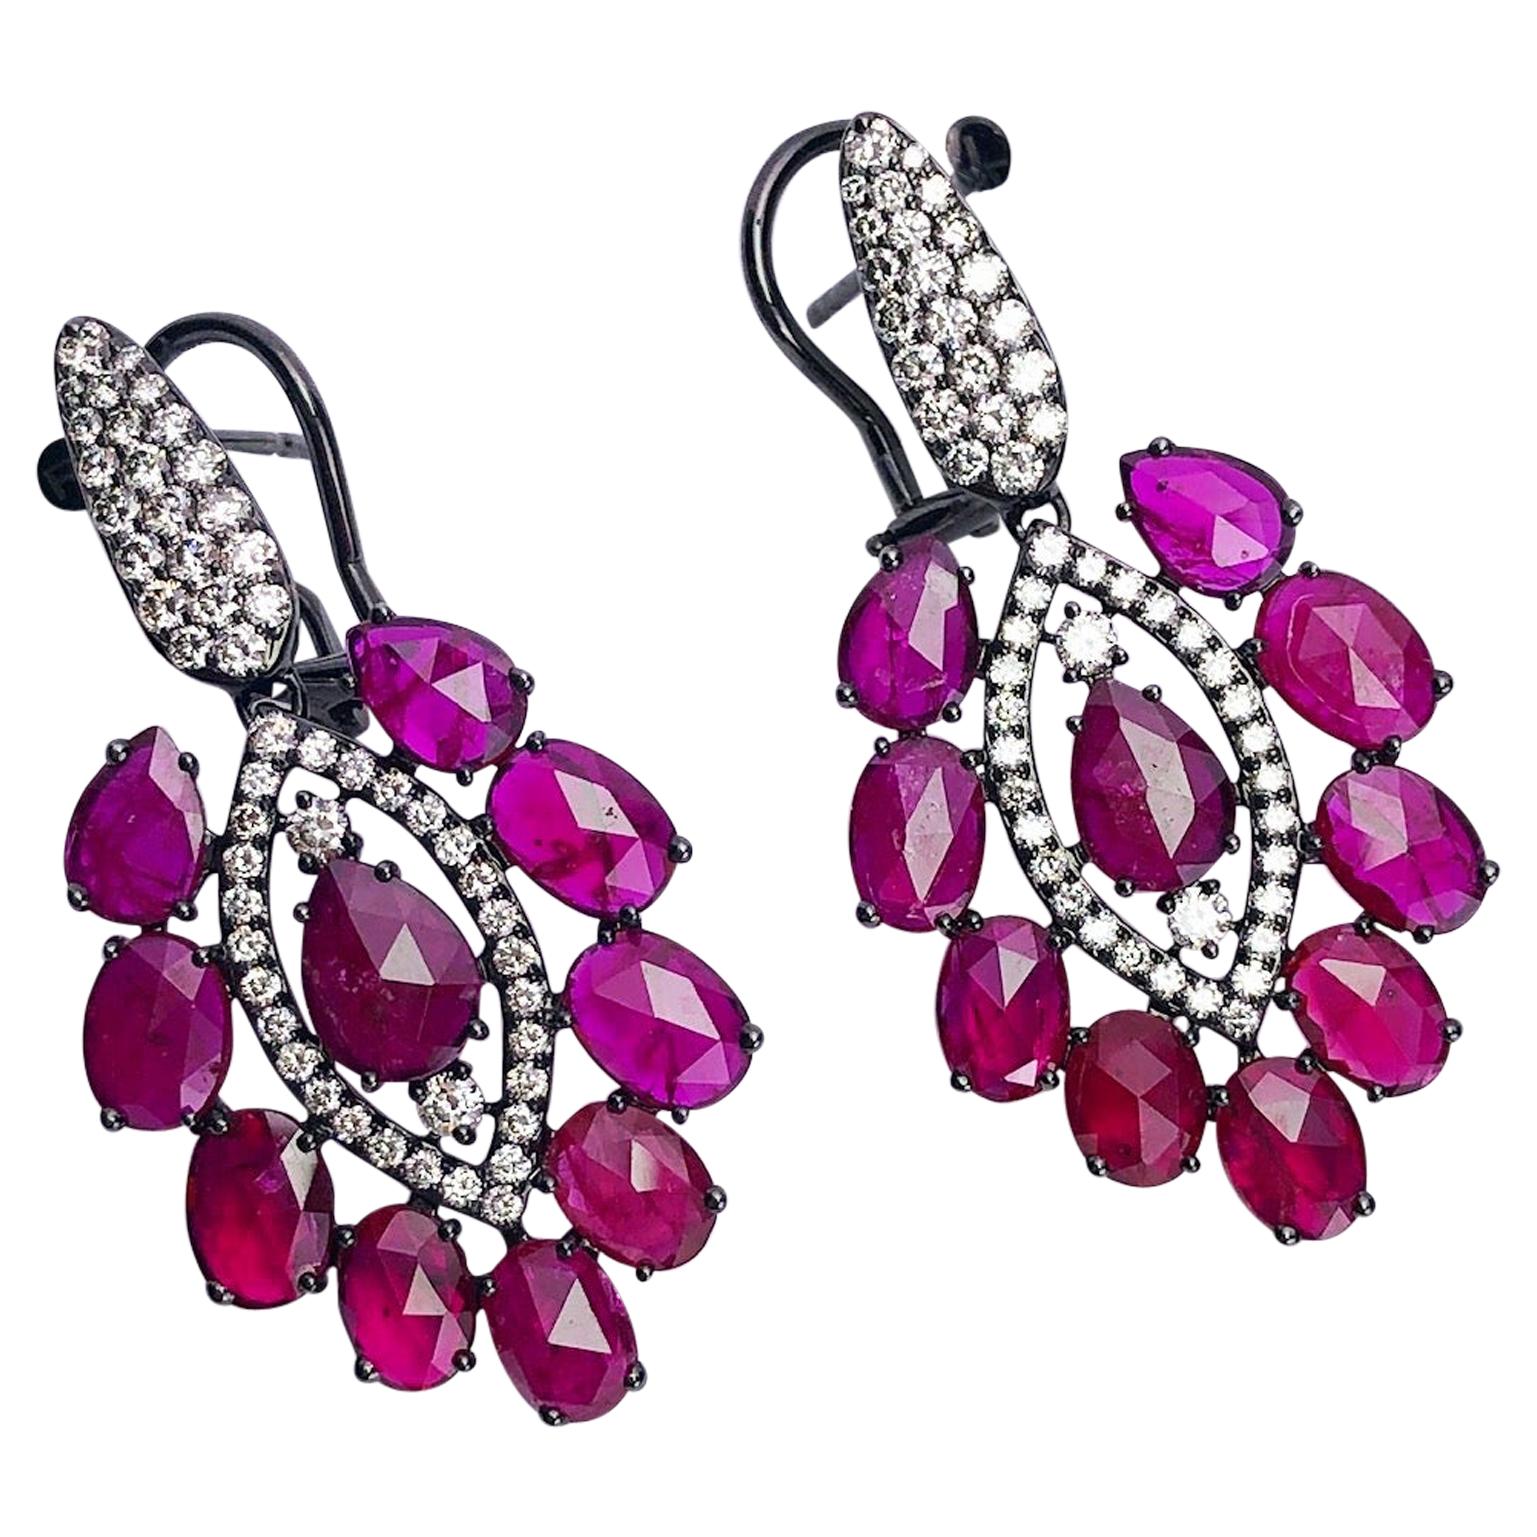 Sutra 18kt Blackened Gold 12.25 Carat Ruby and 1.48 Carat, Diamond Drop Earrings